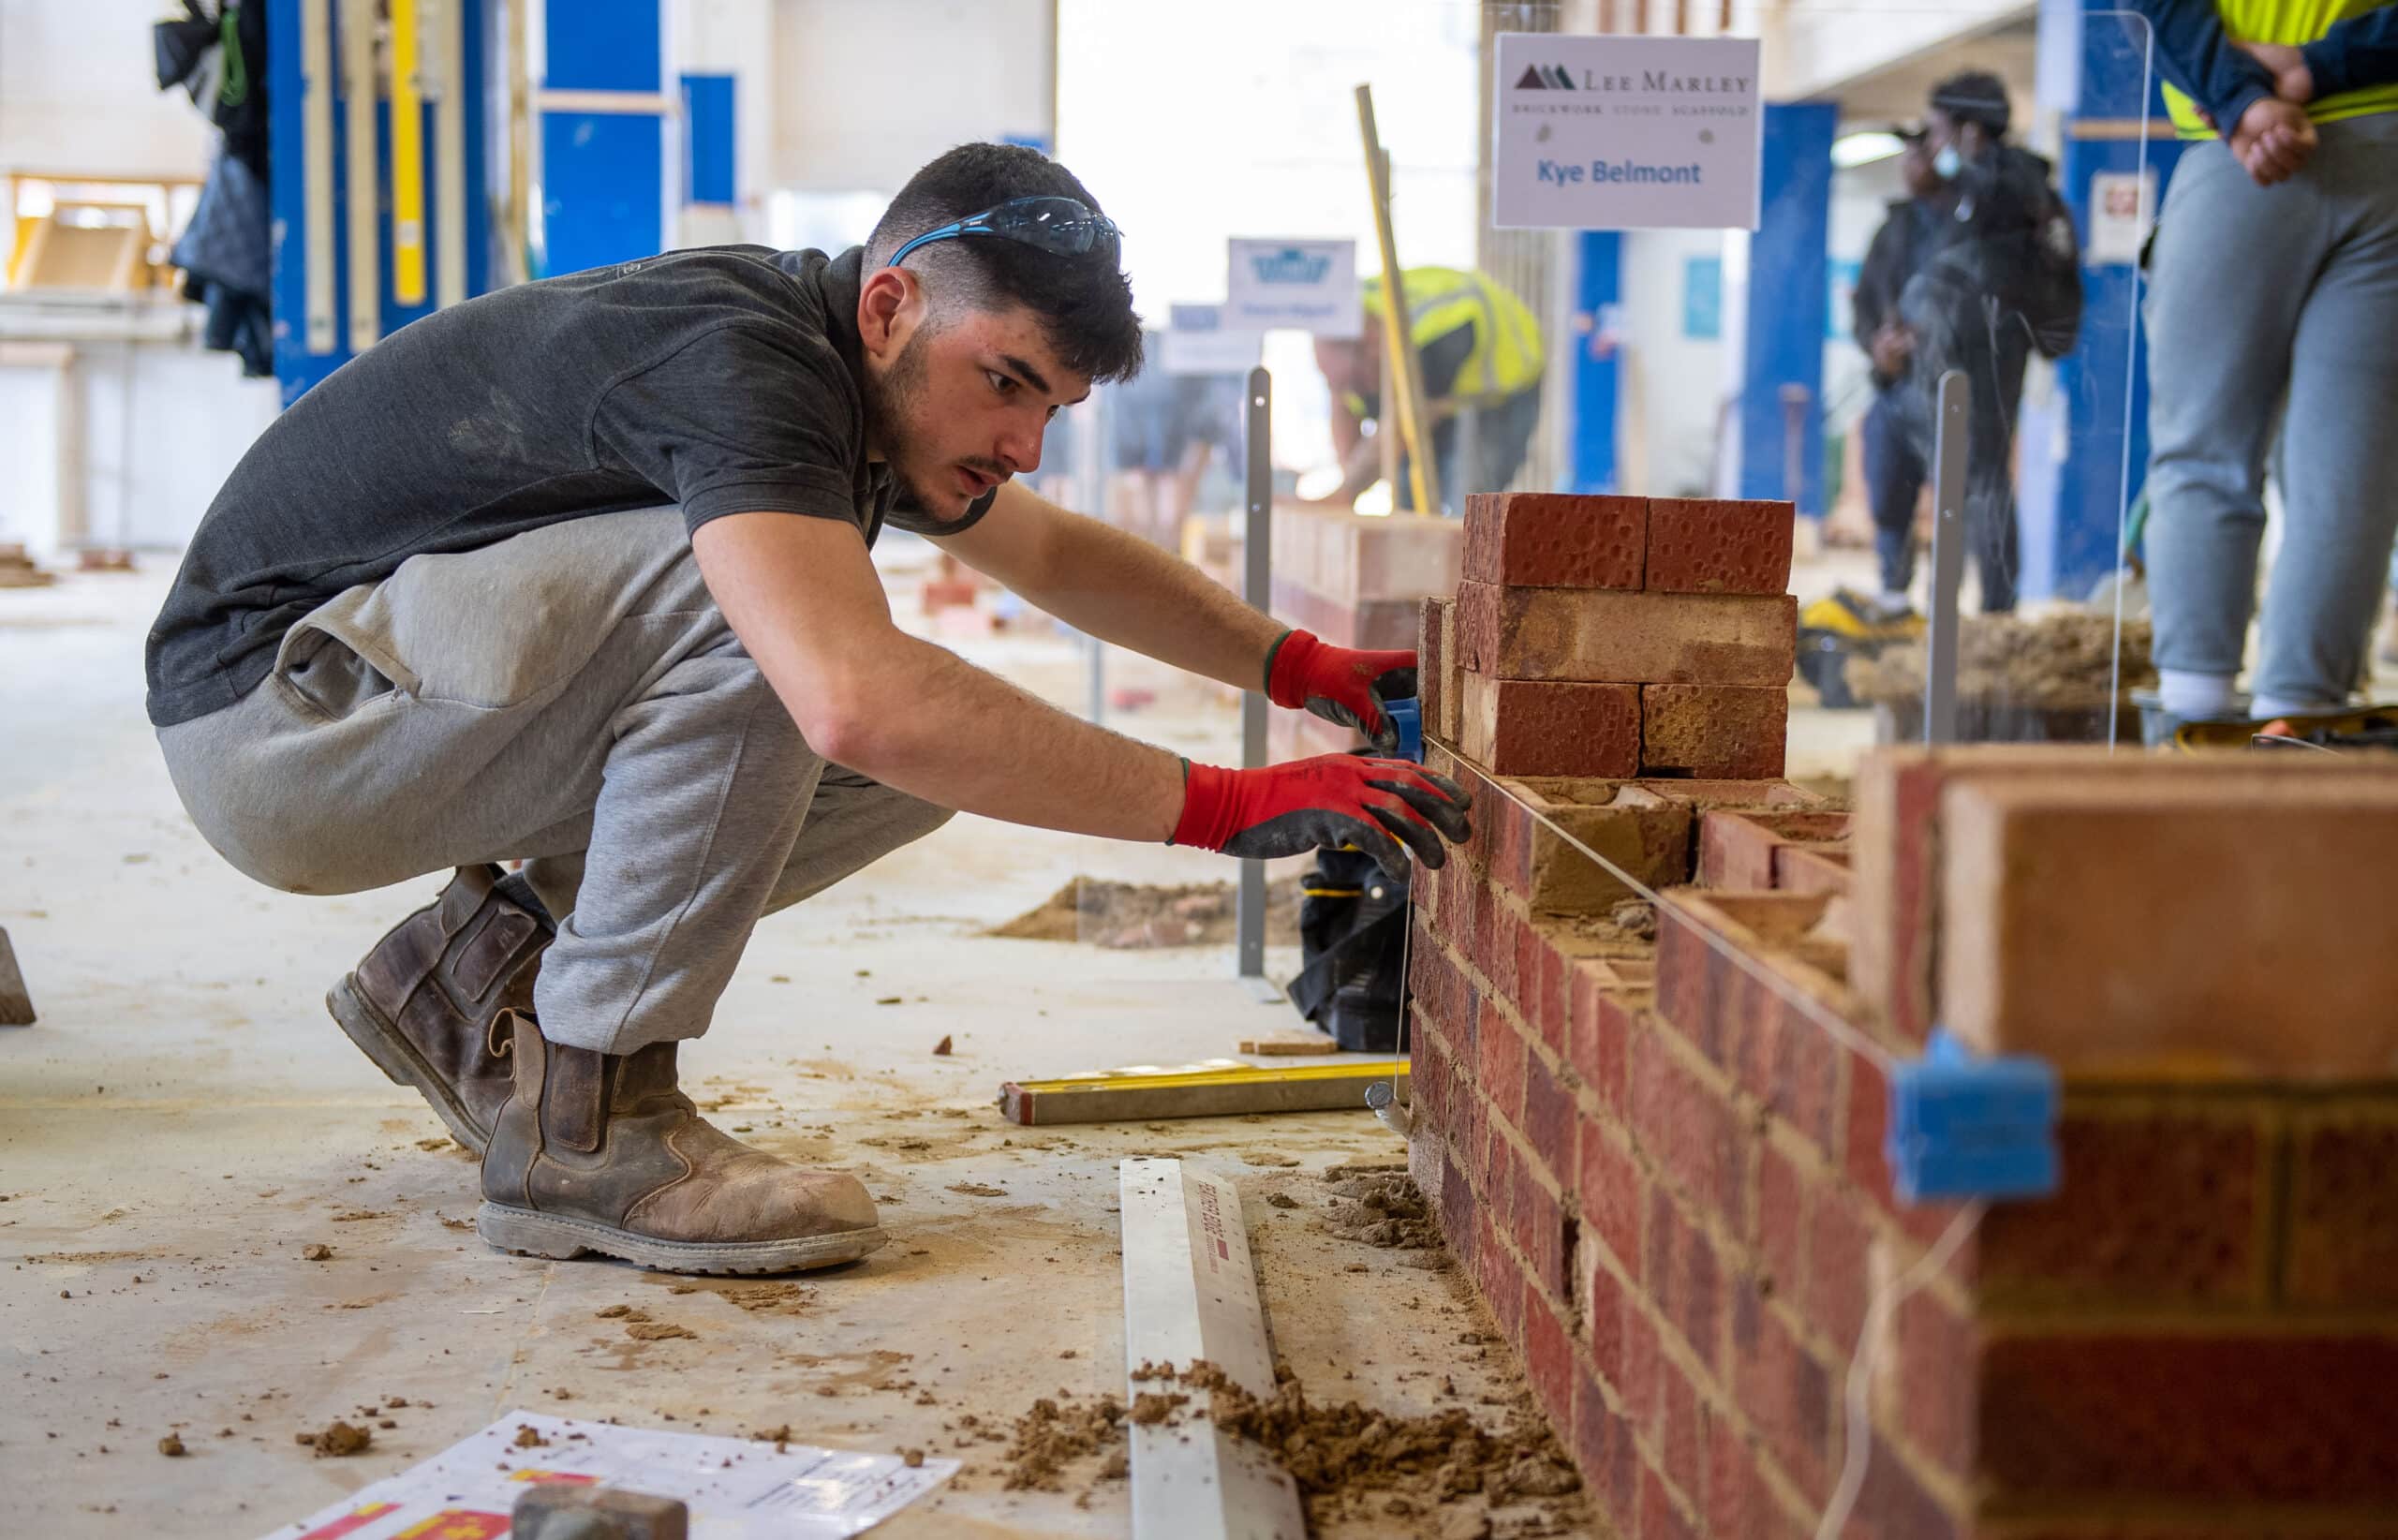 Experienced Bricklayers in Portmarnock